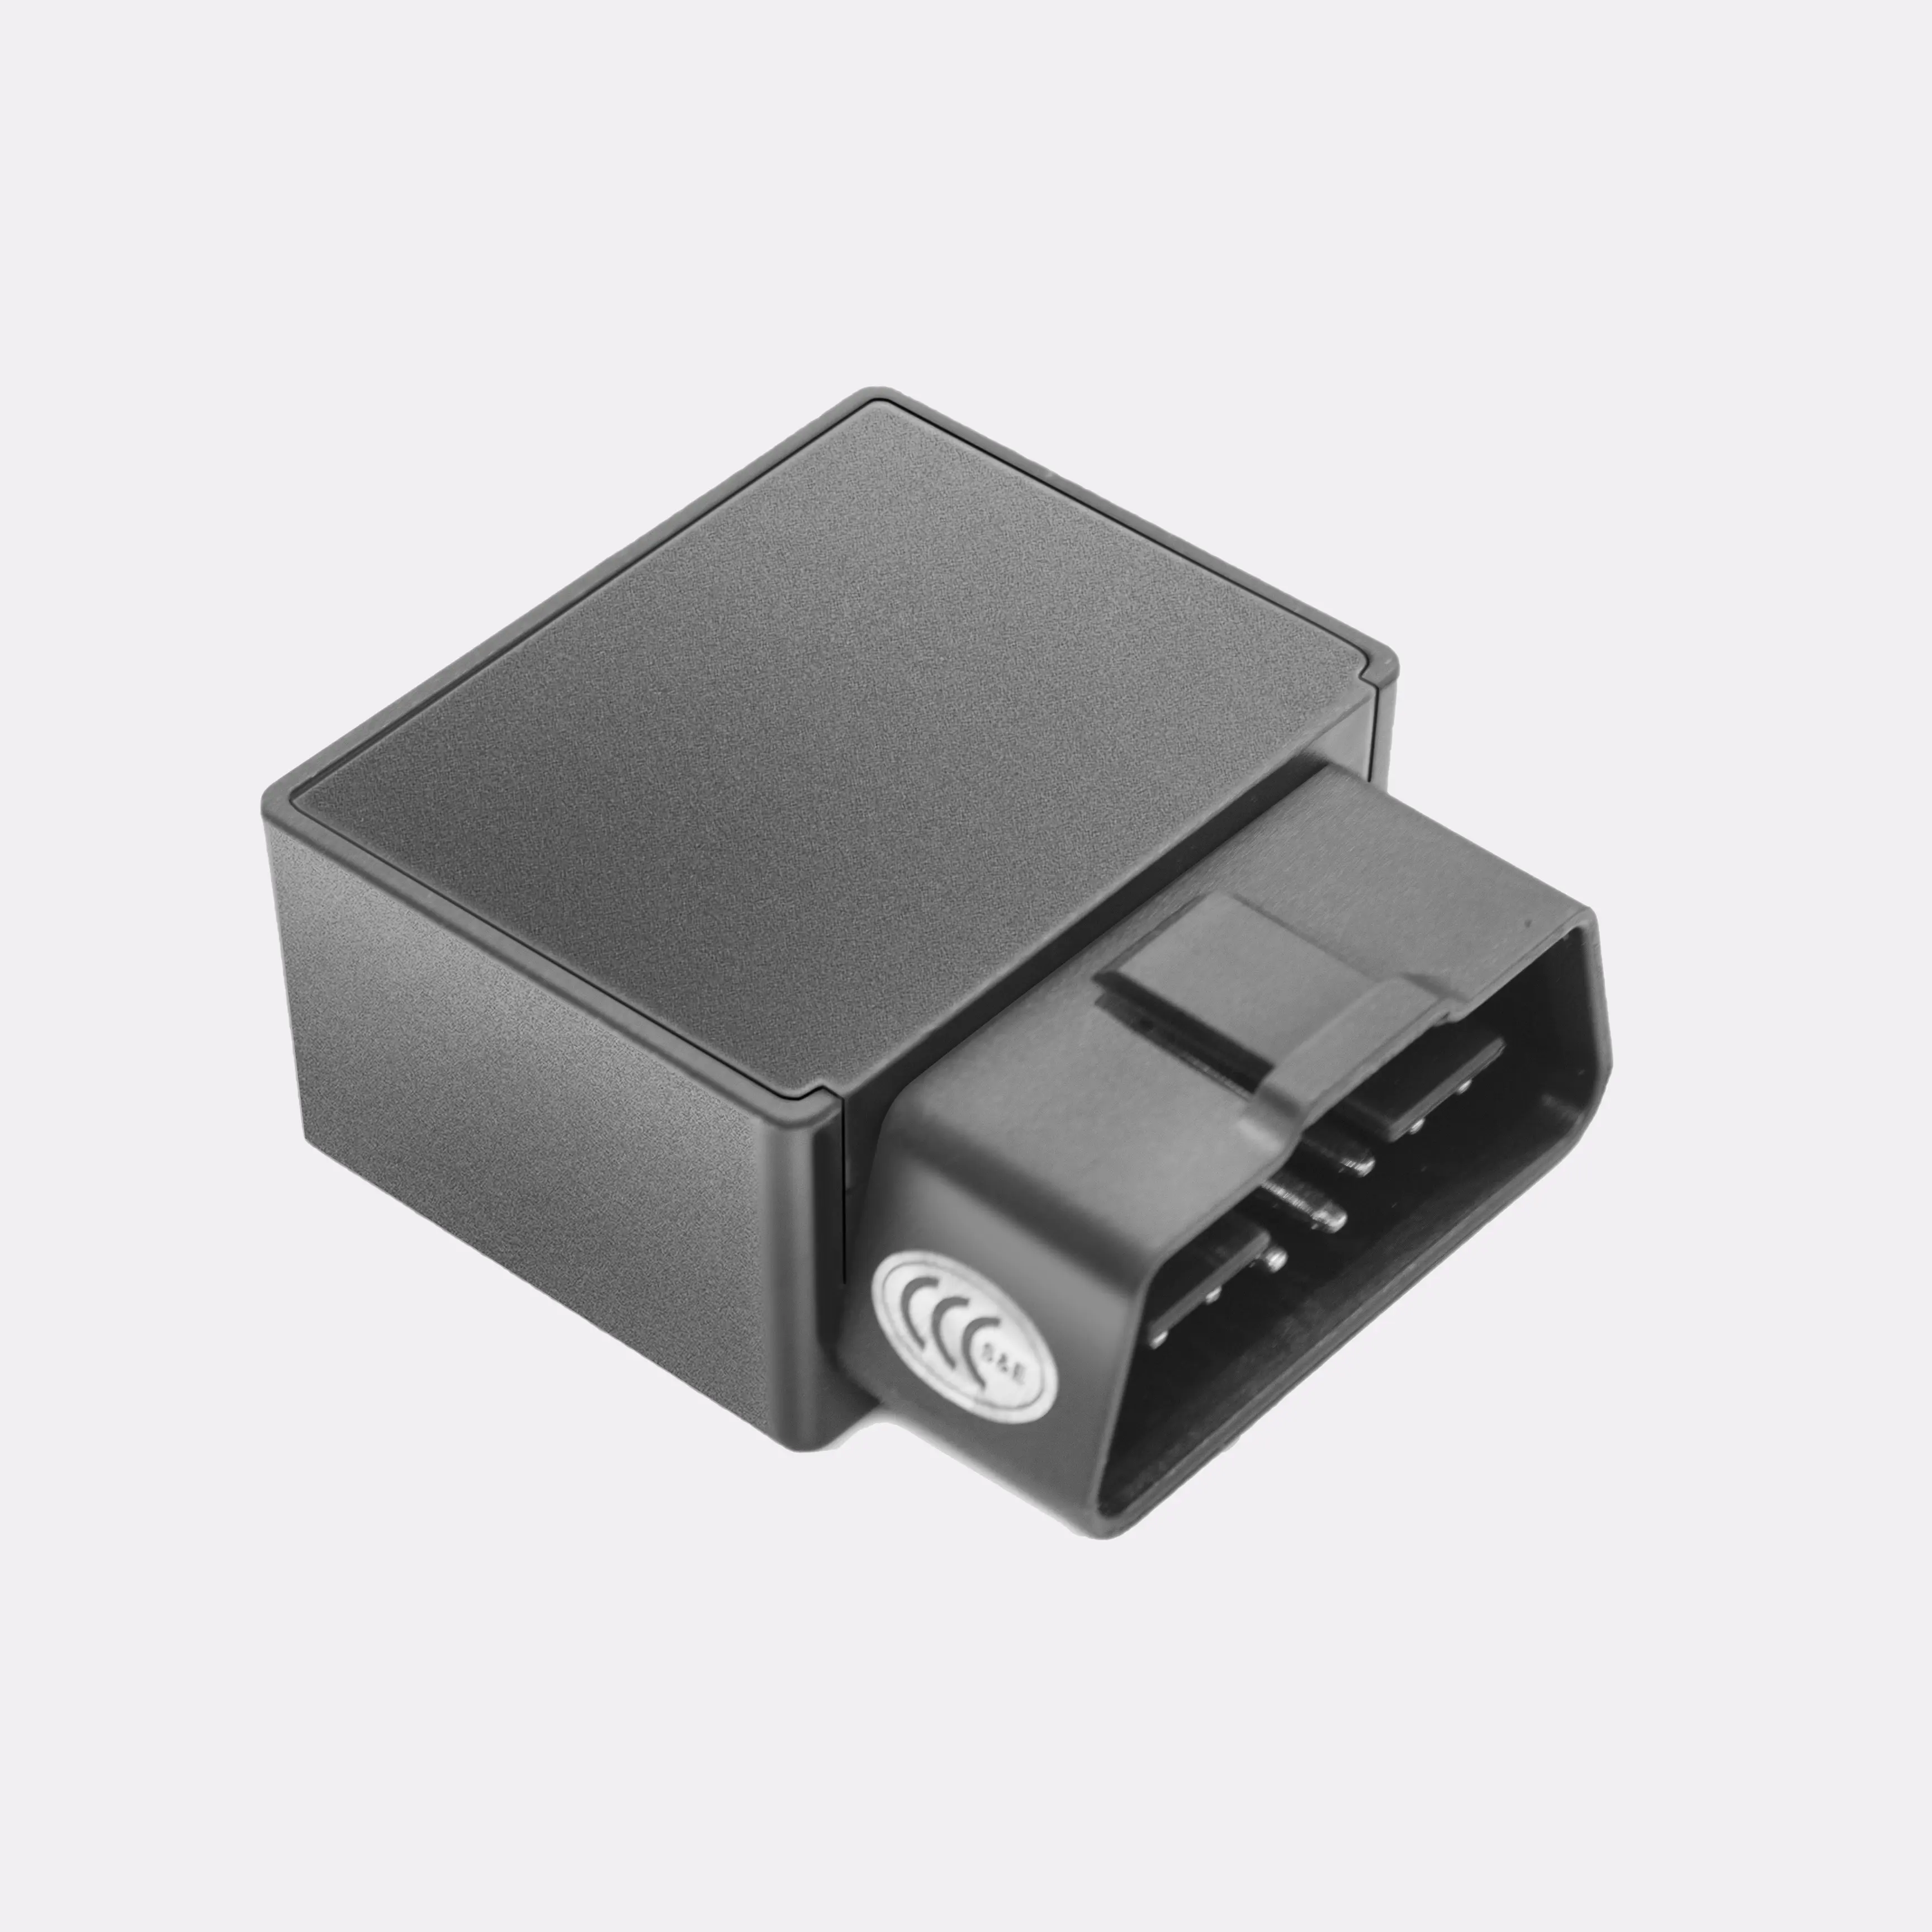 OBD Real-Time Tracking Device America HST-GT08 Plug and Play 4G Fleet Vehicle Tracking GPS Tracker